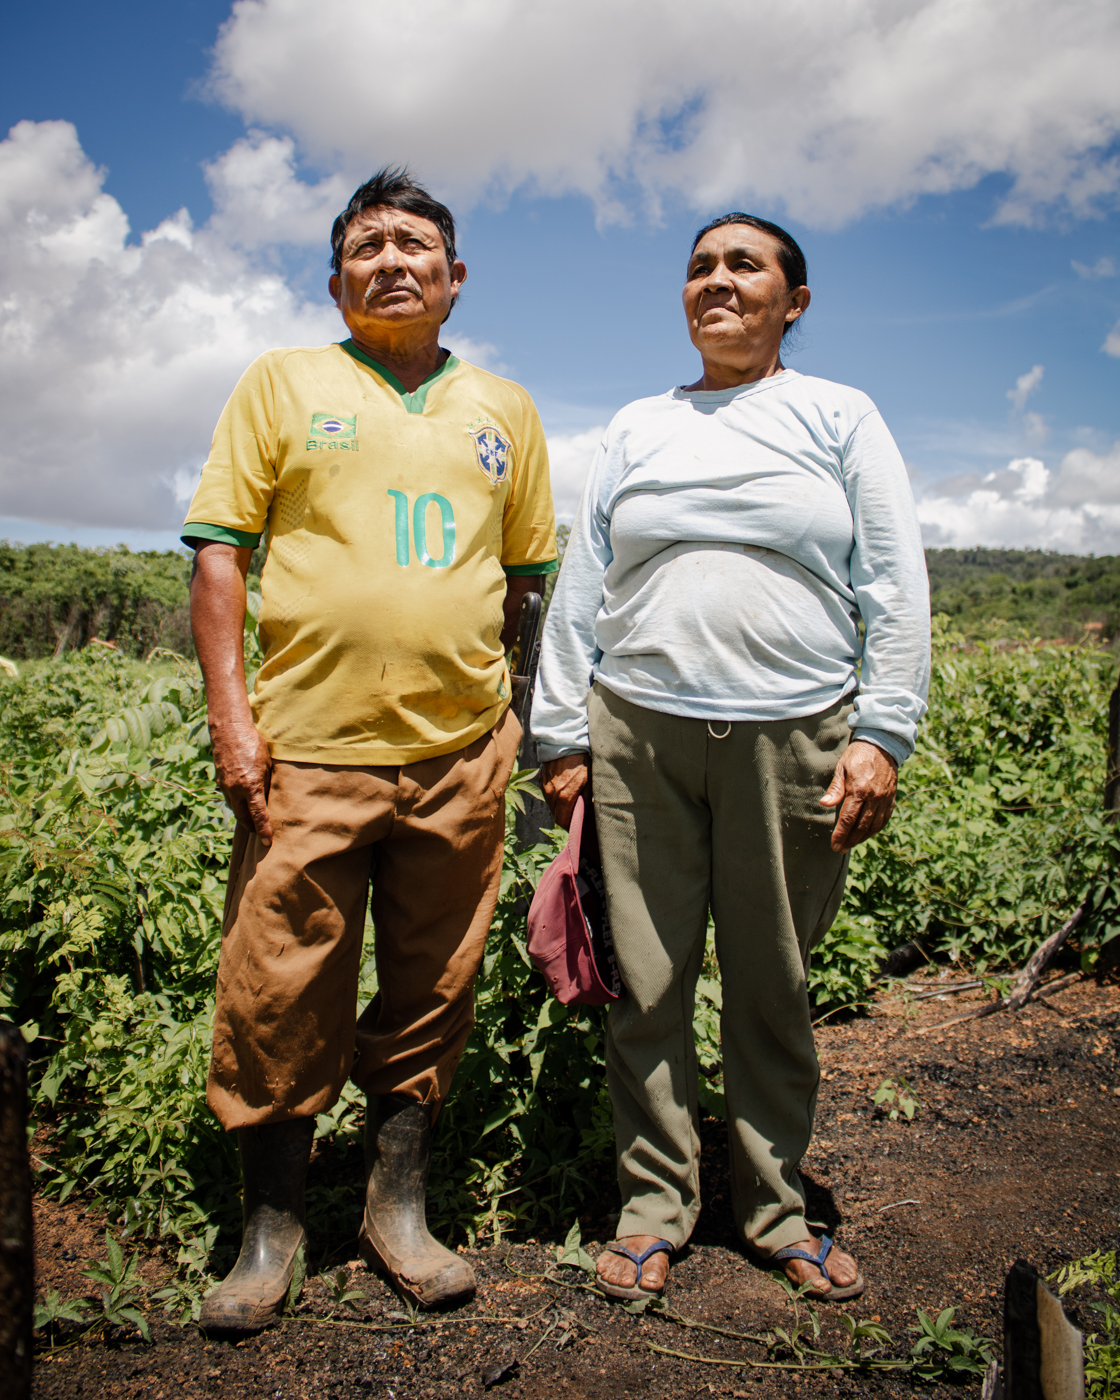 Telma Macuxi and her husband pose in front of their field in the Willimon community.